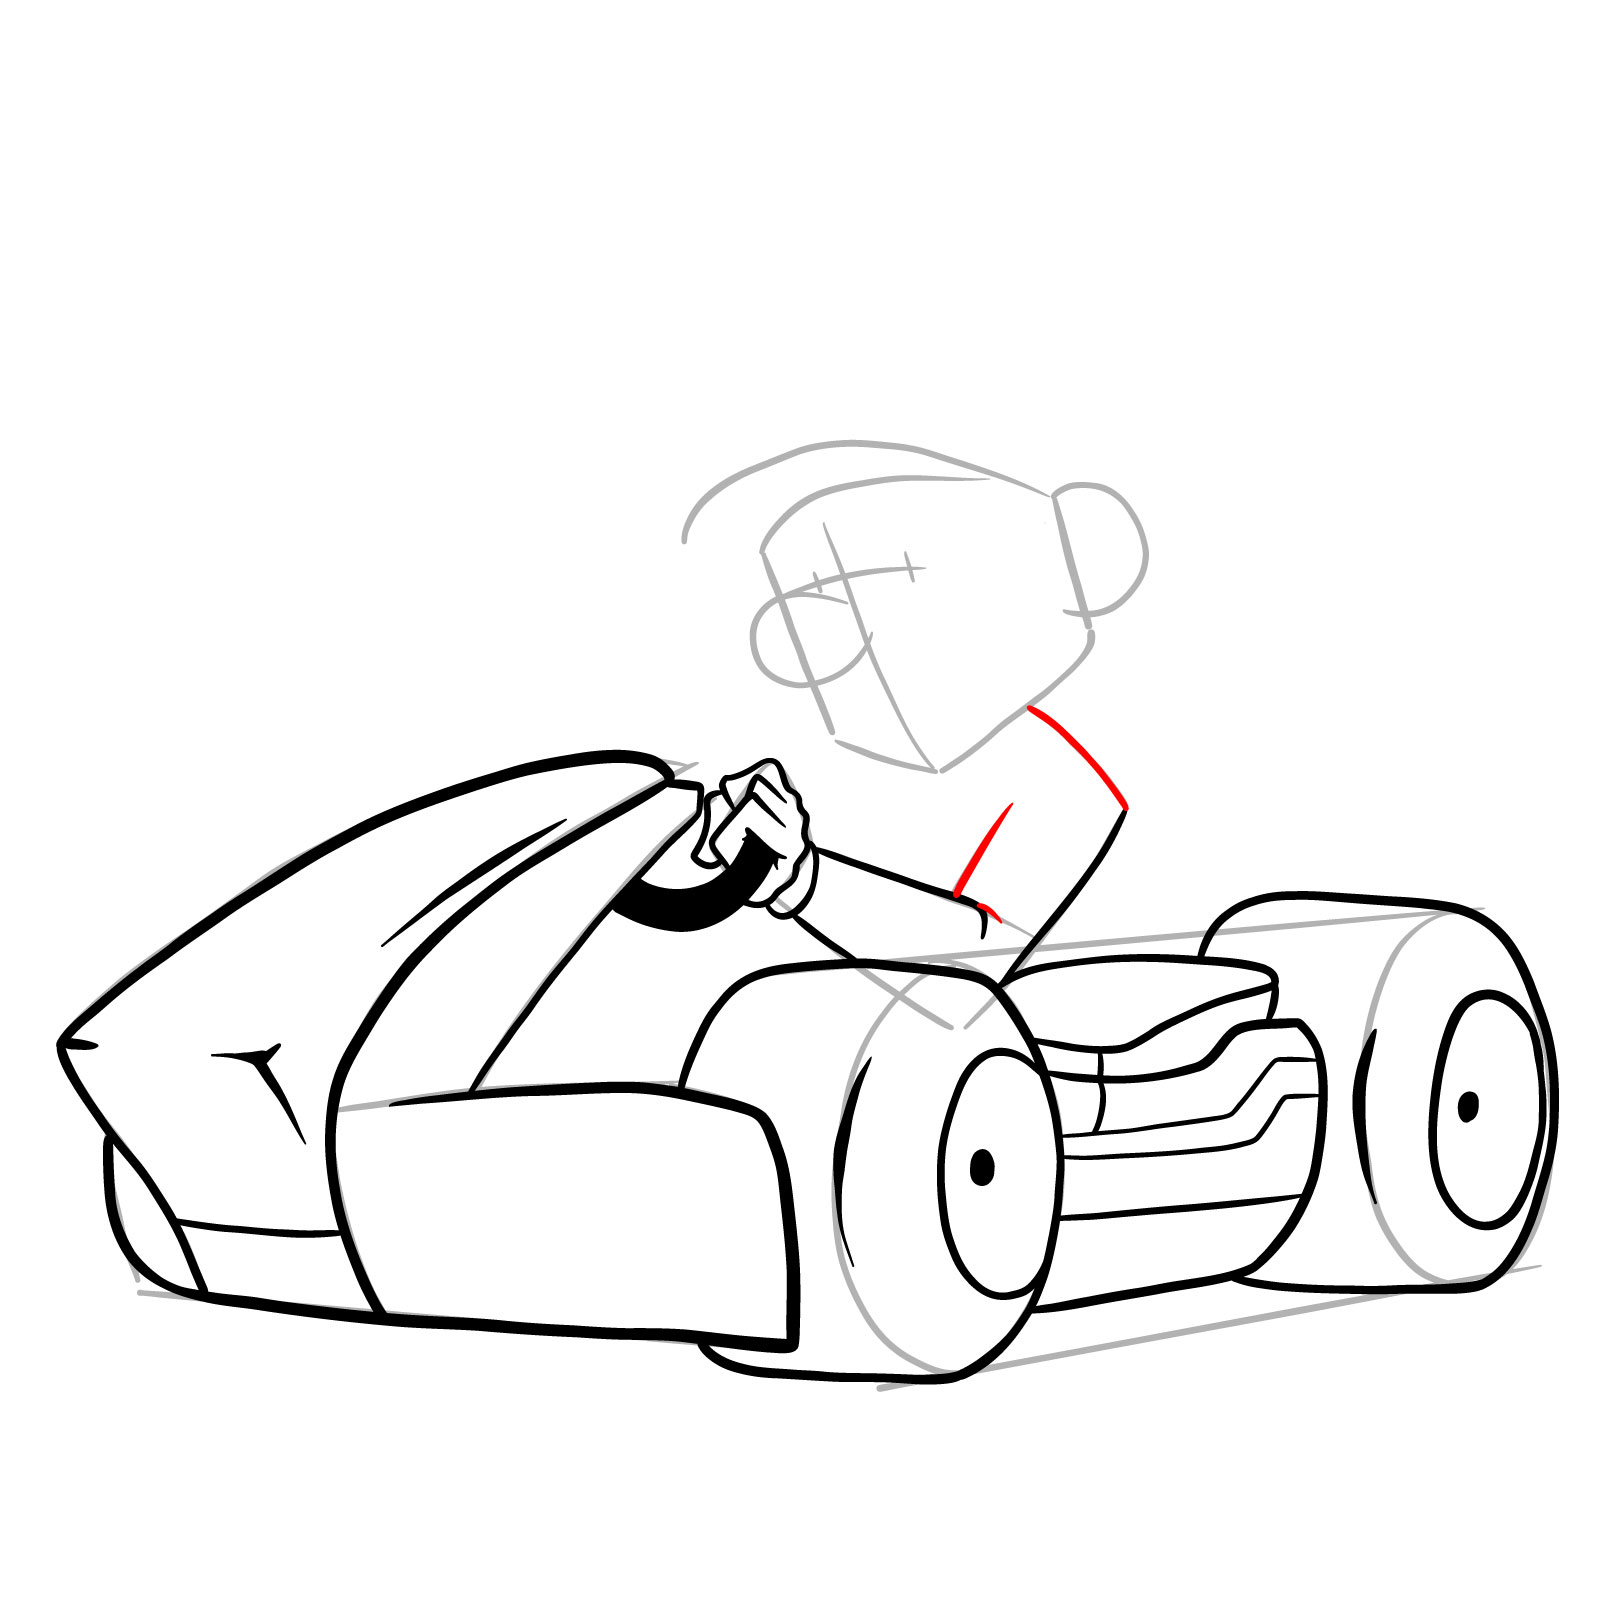 How to draw Race Traitors Mario - step 19